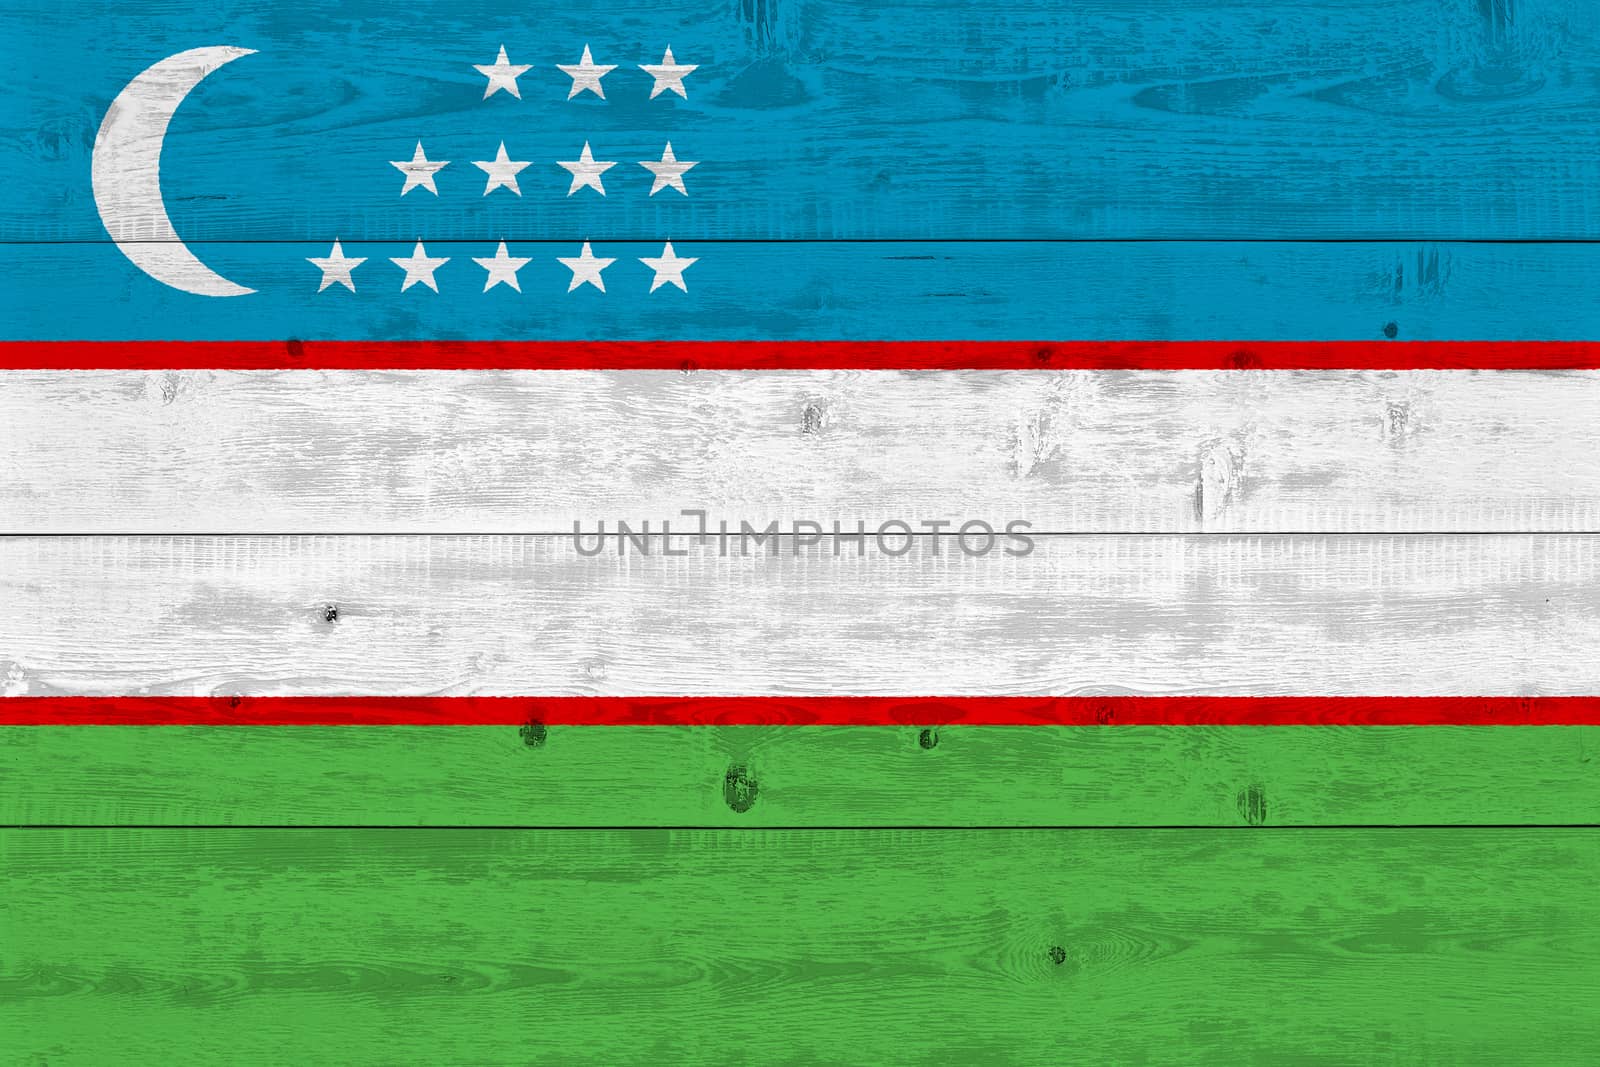 Uzbekistan flag painted on old wood plank by Visual-Content